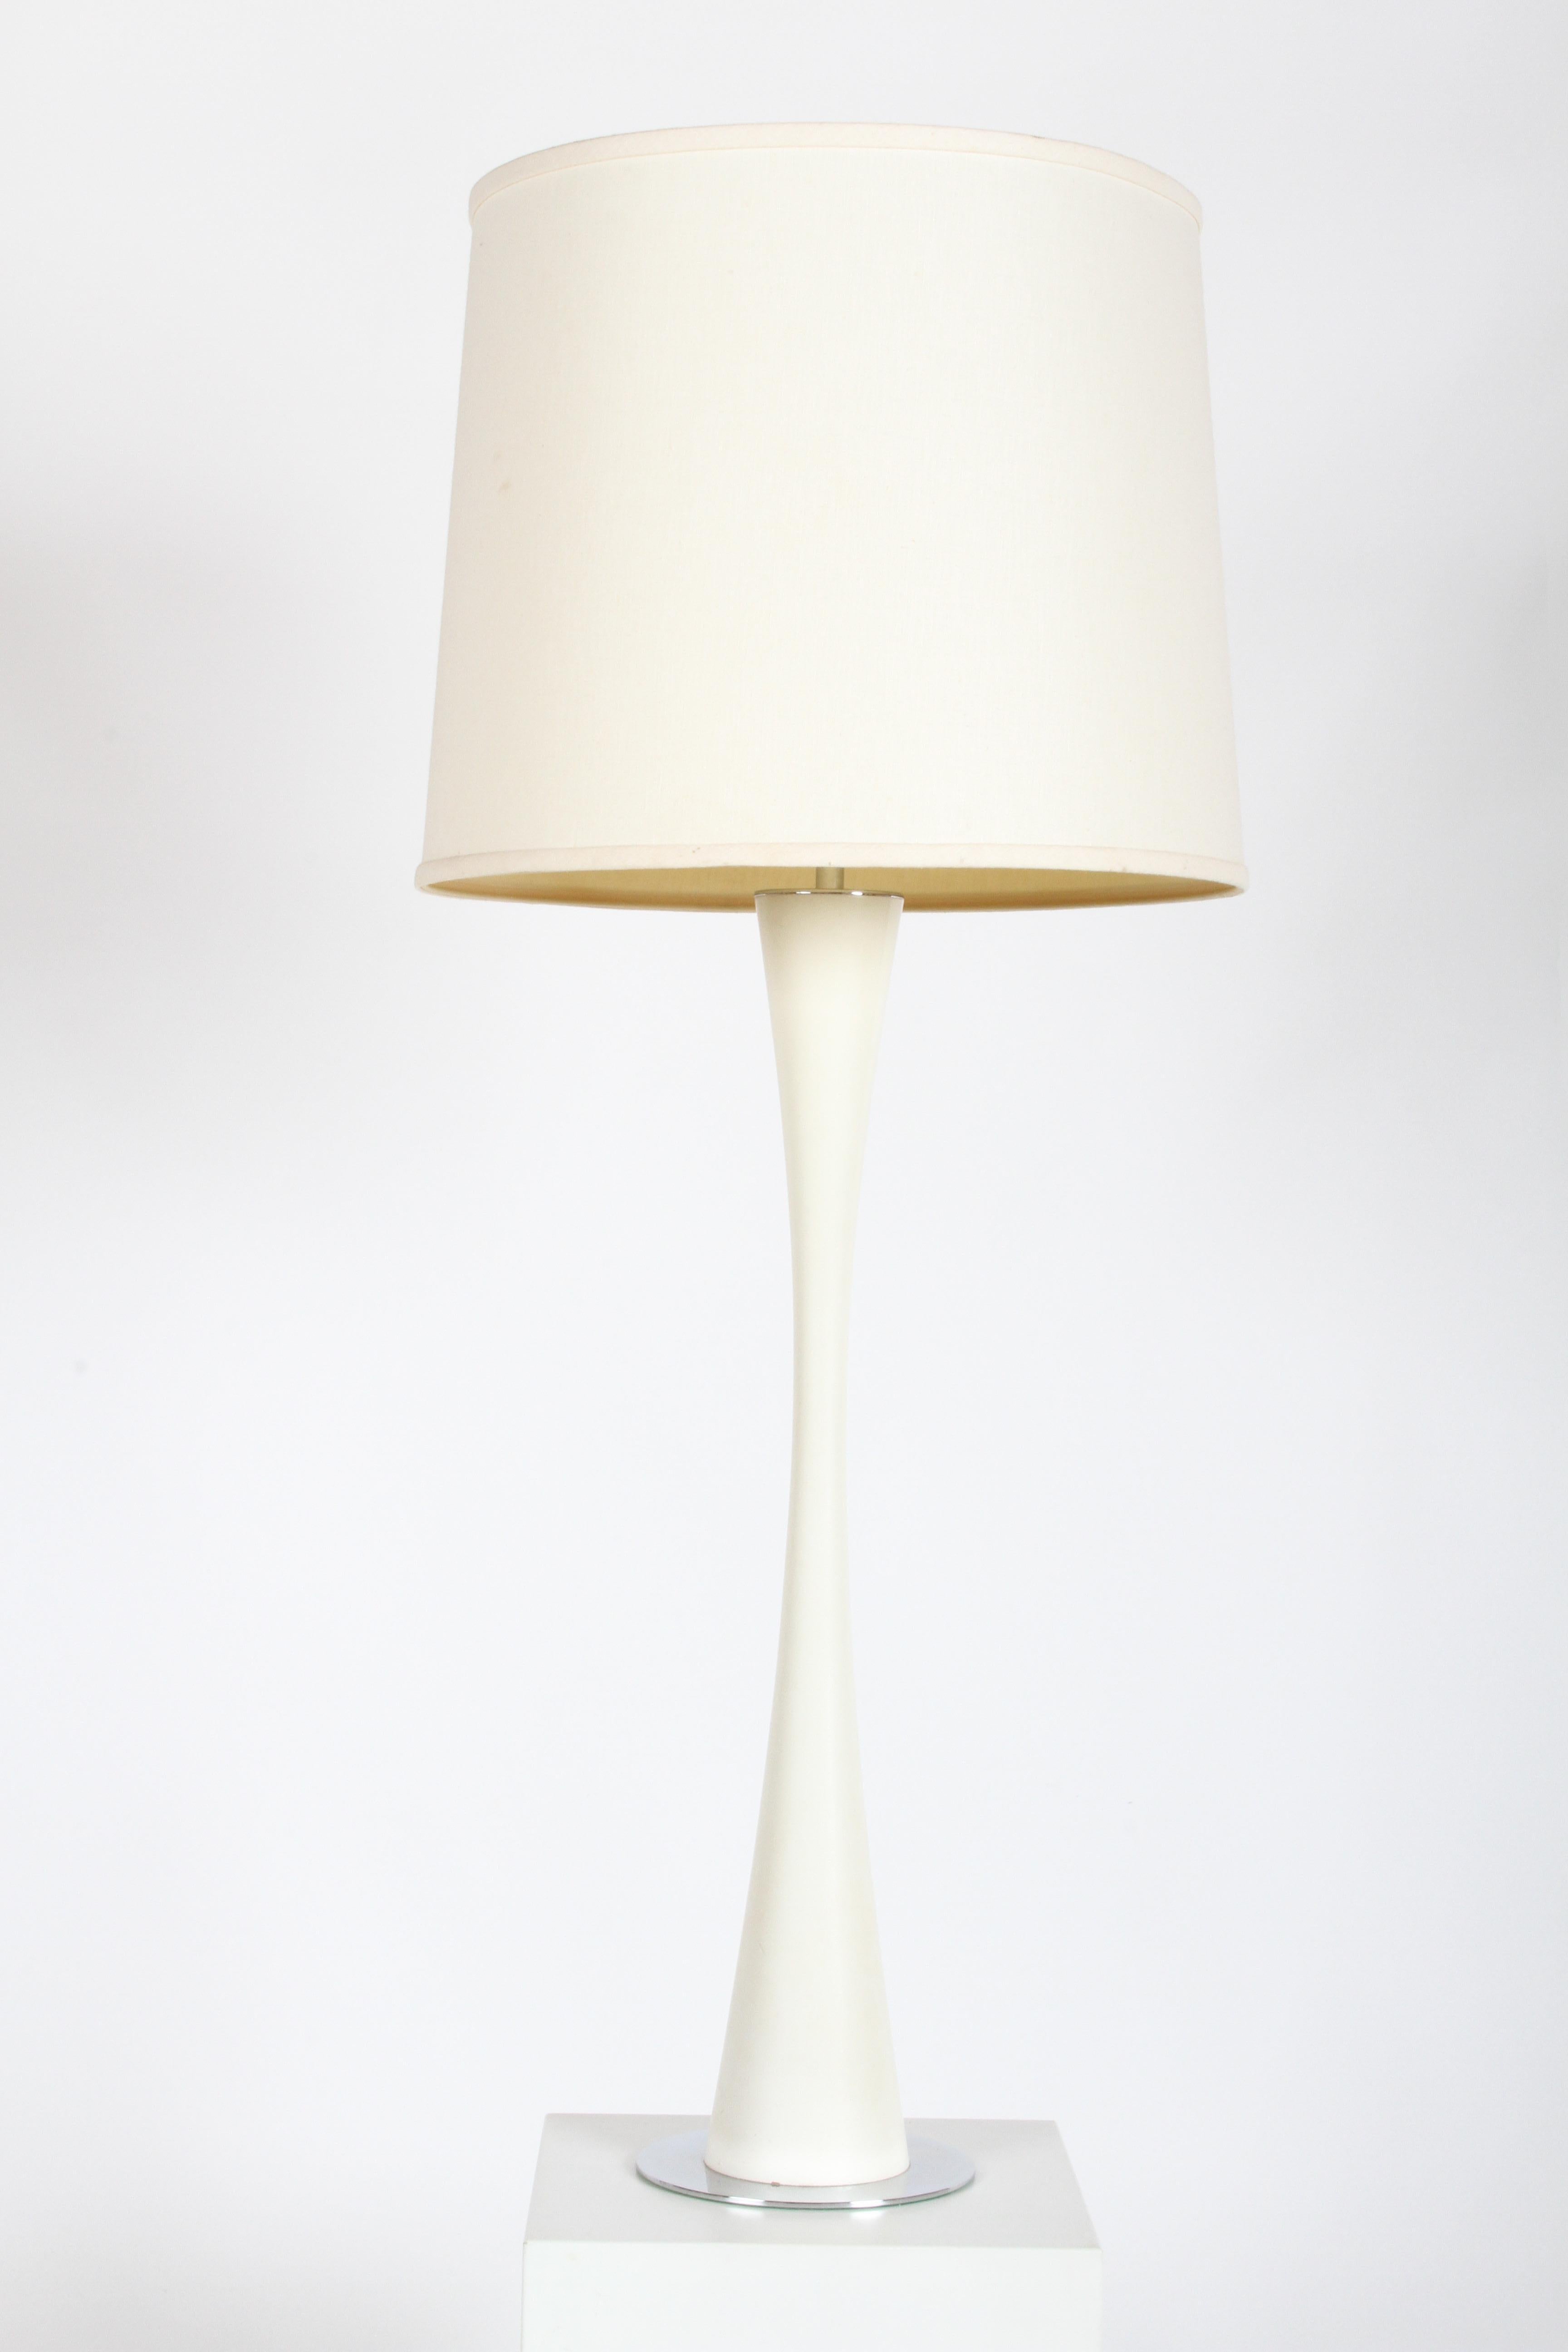 Tall Mid-Century Modern White Tulip Form Column Table Lamp with Chrome Base In Good Condition For Sale In St. Louis, MO